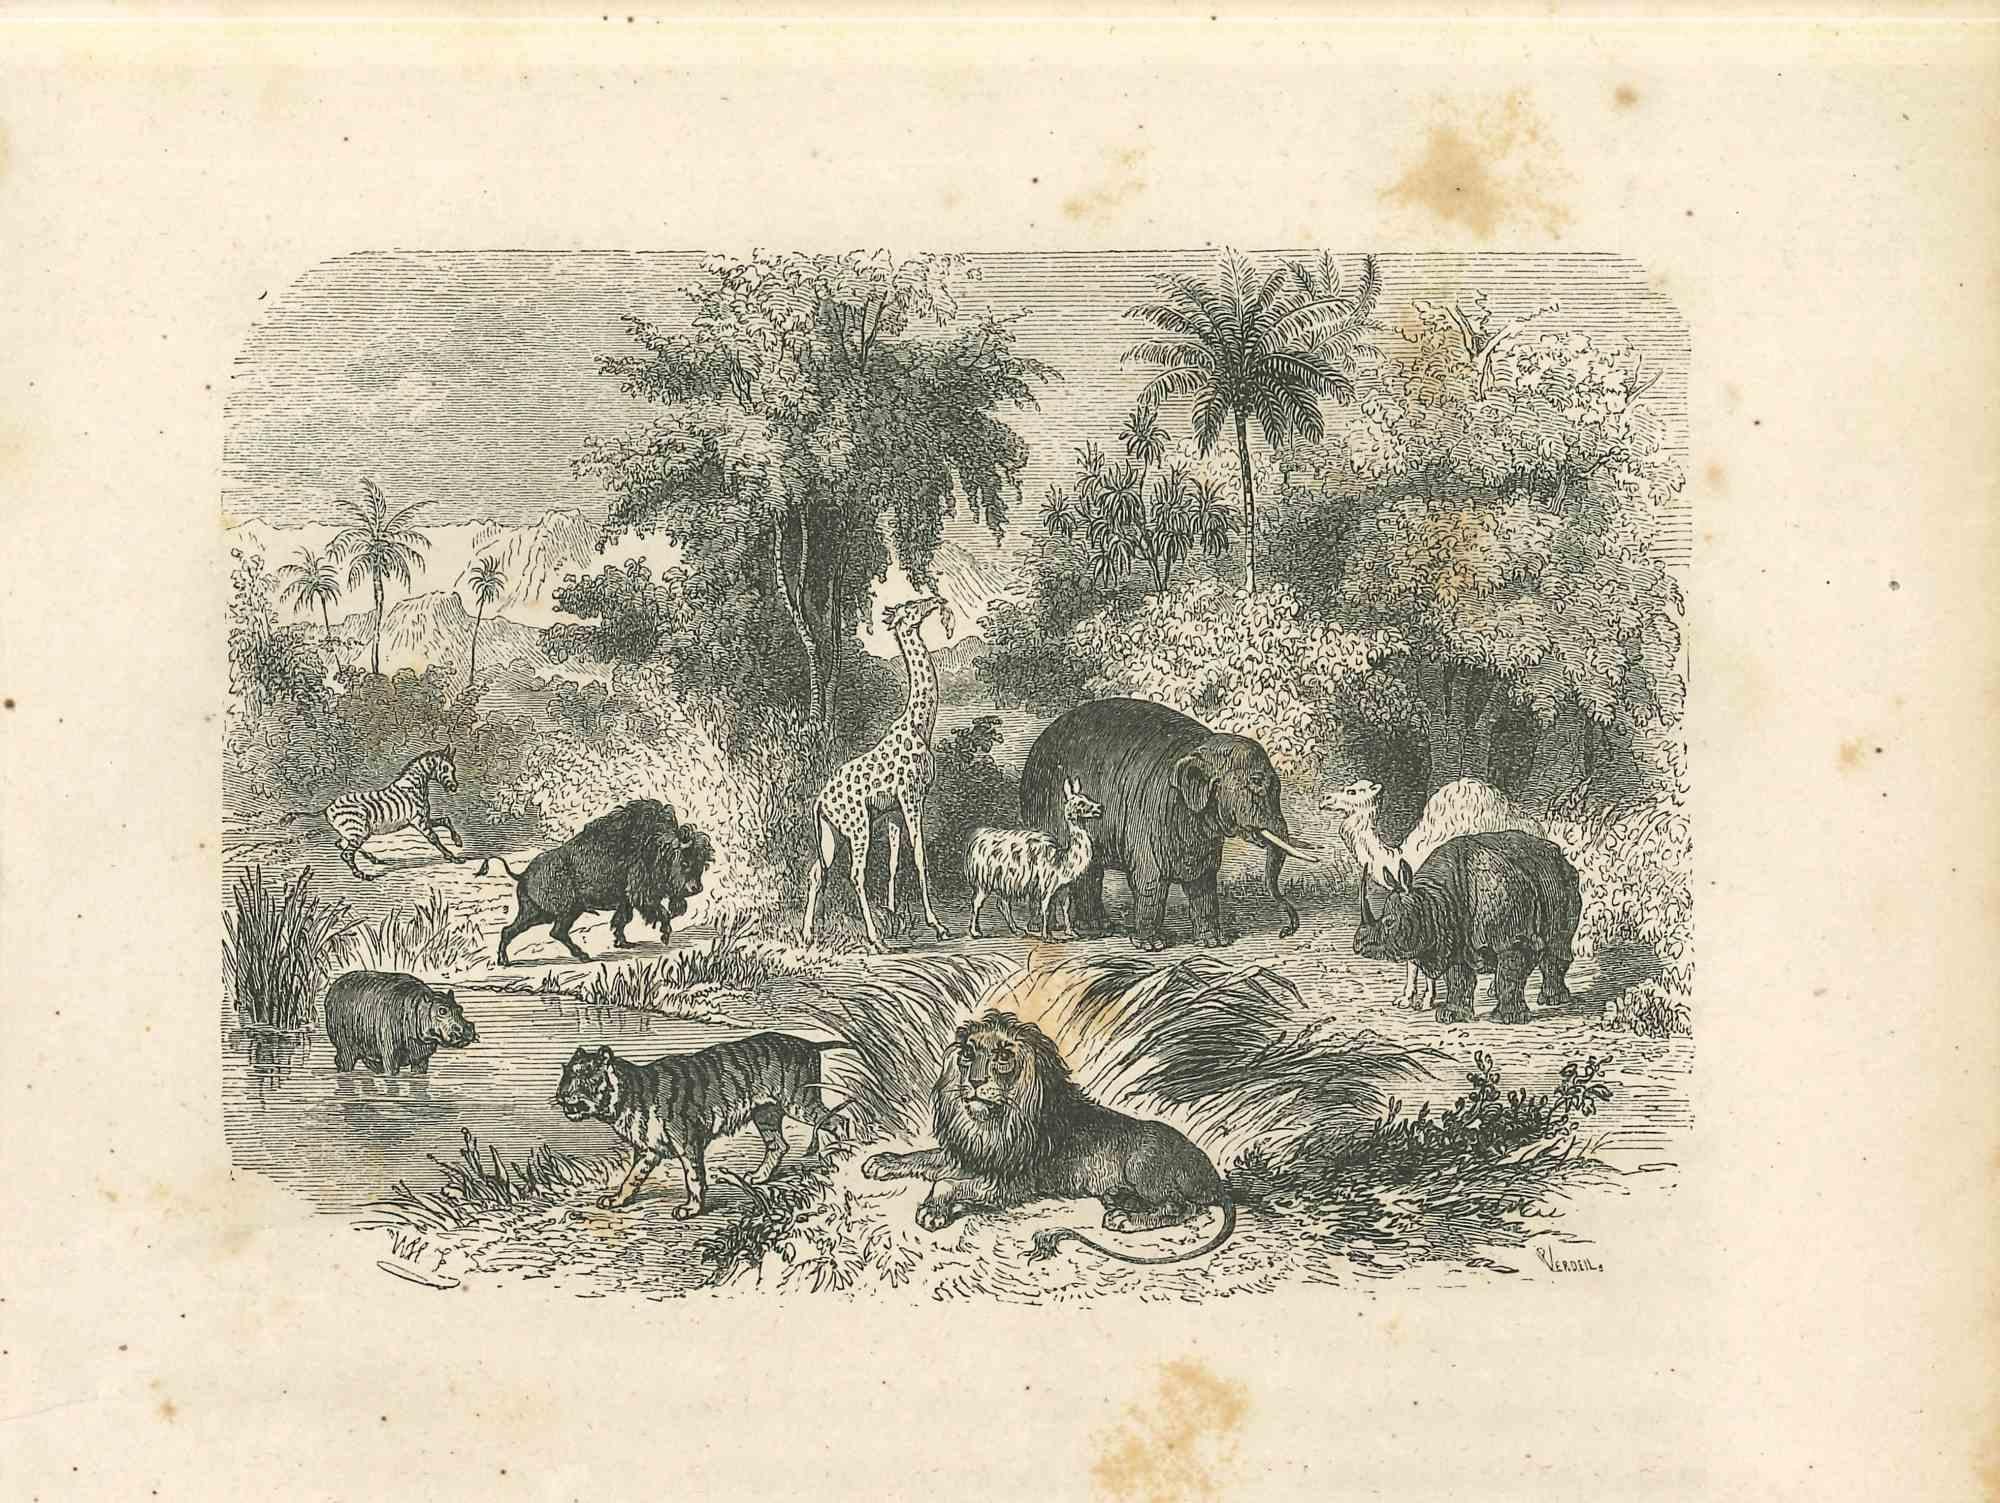 The Animals in Jungle - Lithograph by Paul Gervais - 1854